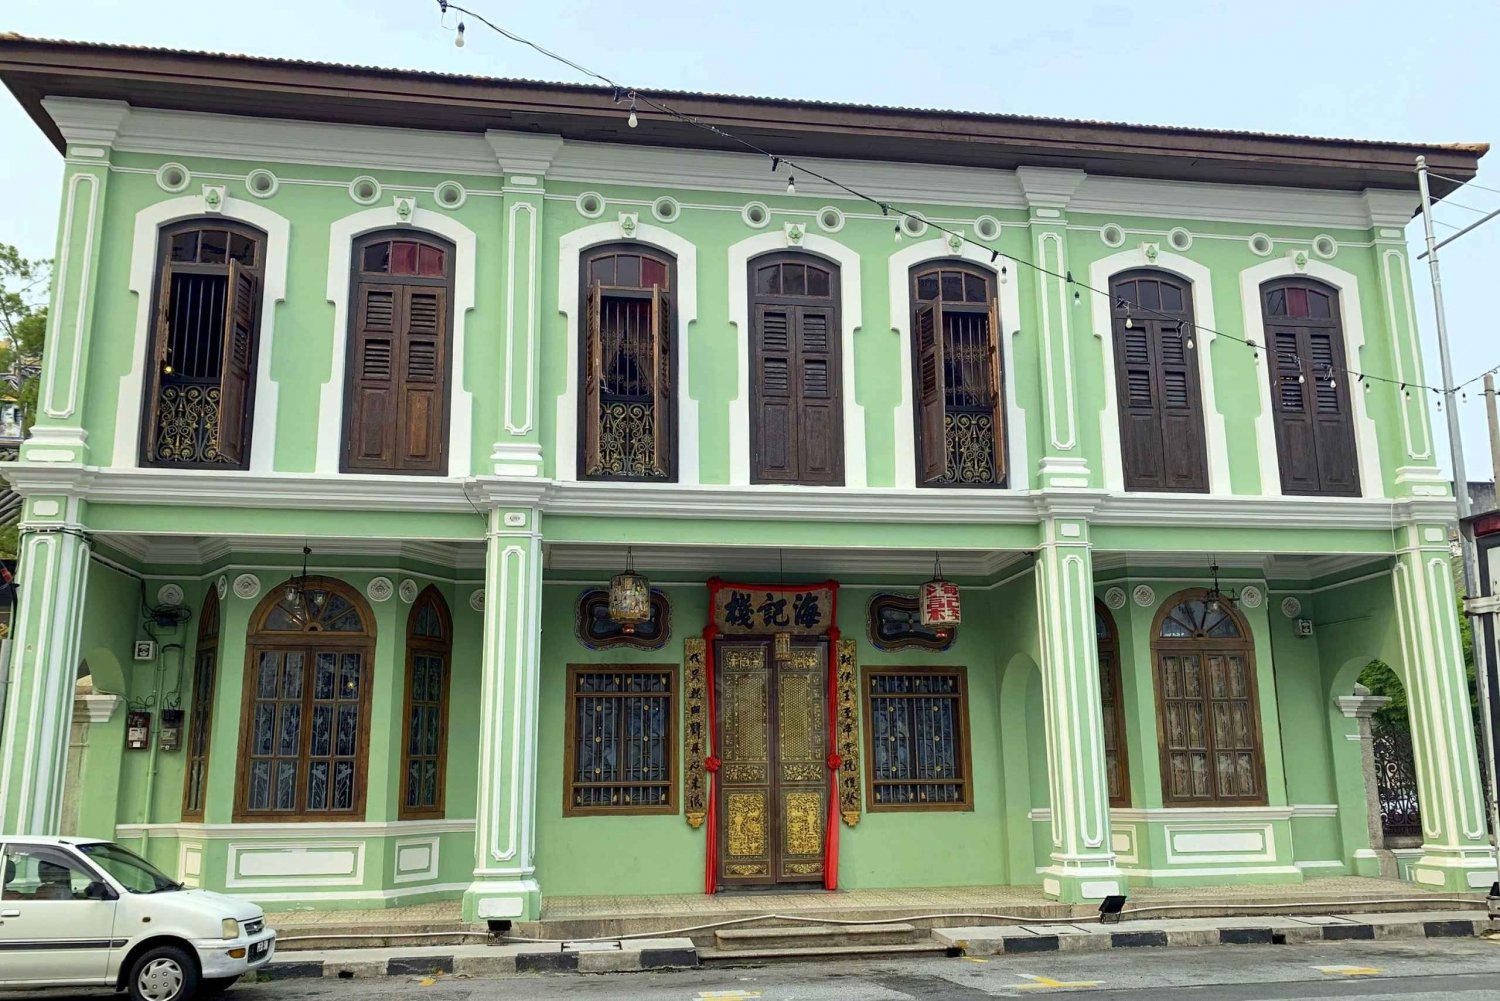 George Town: Private Half-Day Historical City Tour